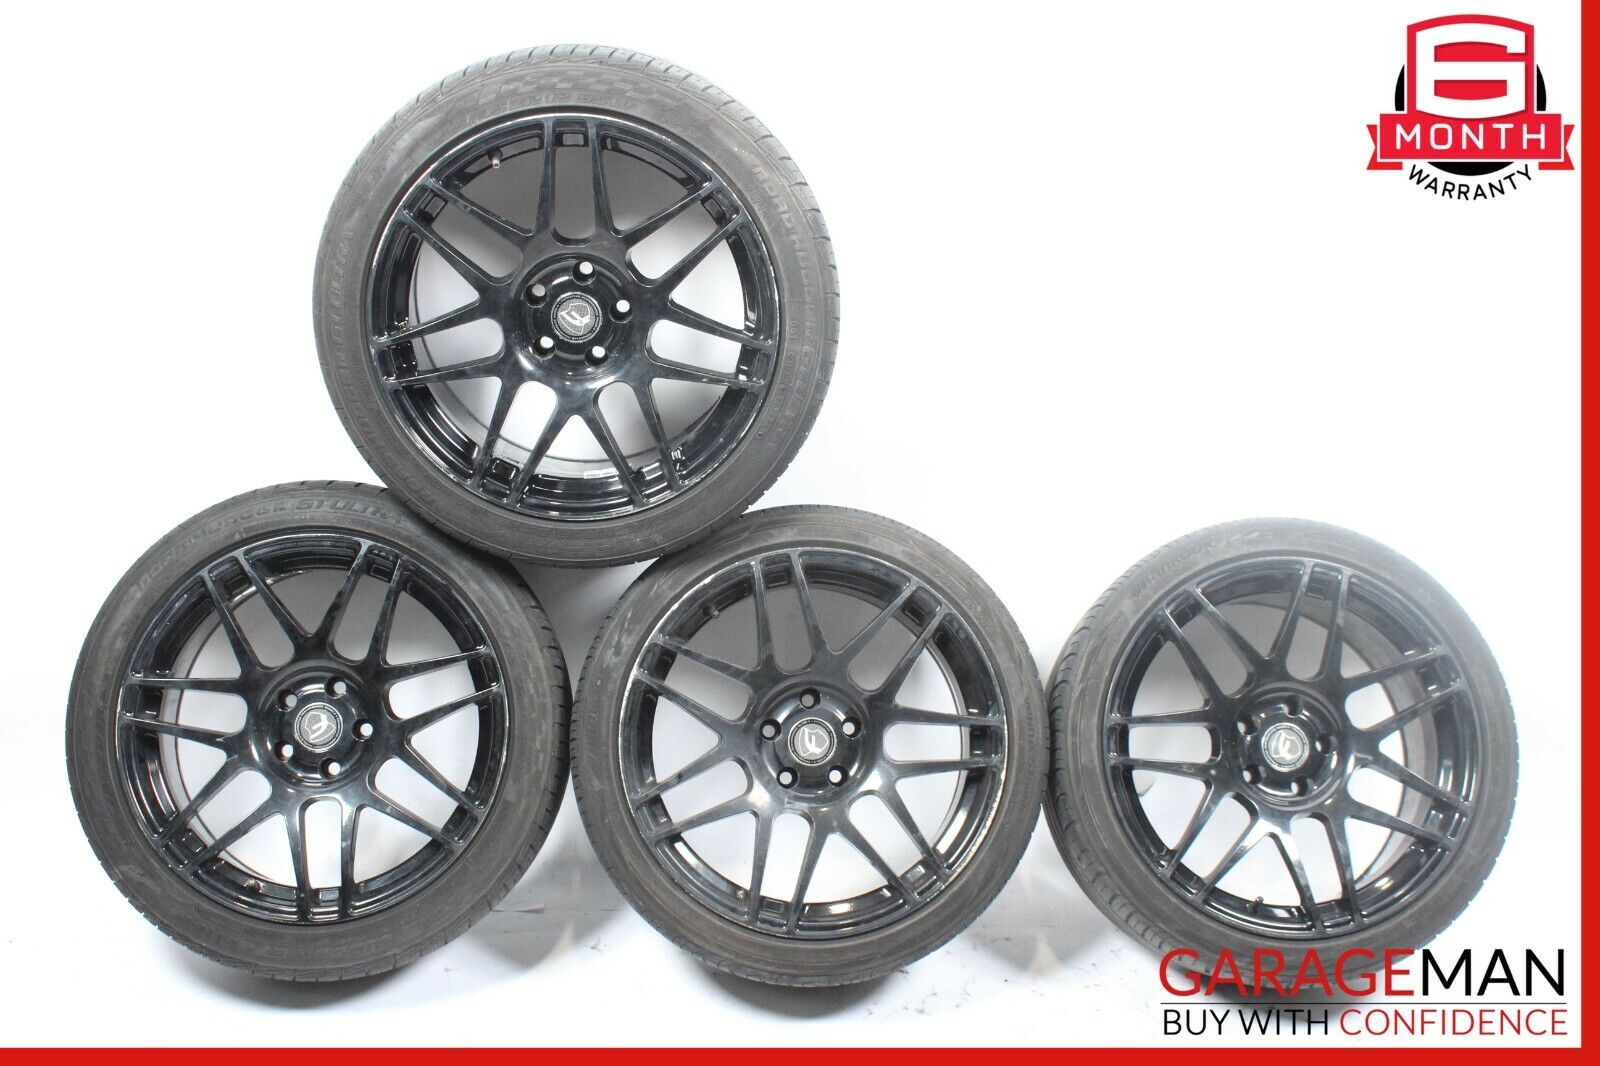 Mercedes W220 S500 Staggered 8.5x9.5 Wheel Tire Rim Set of 4 Pc R18 Aftermarket